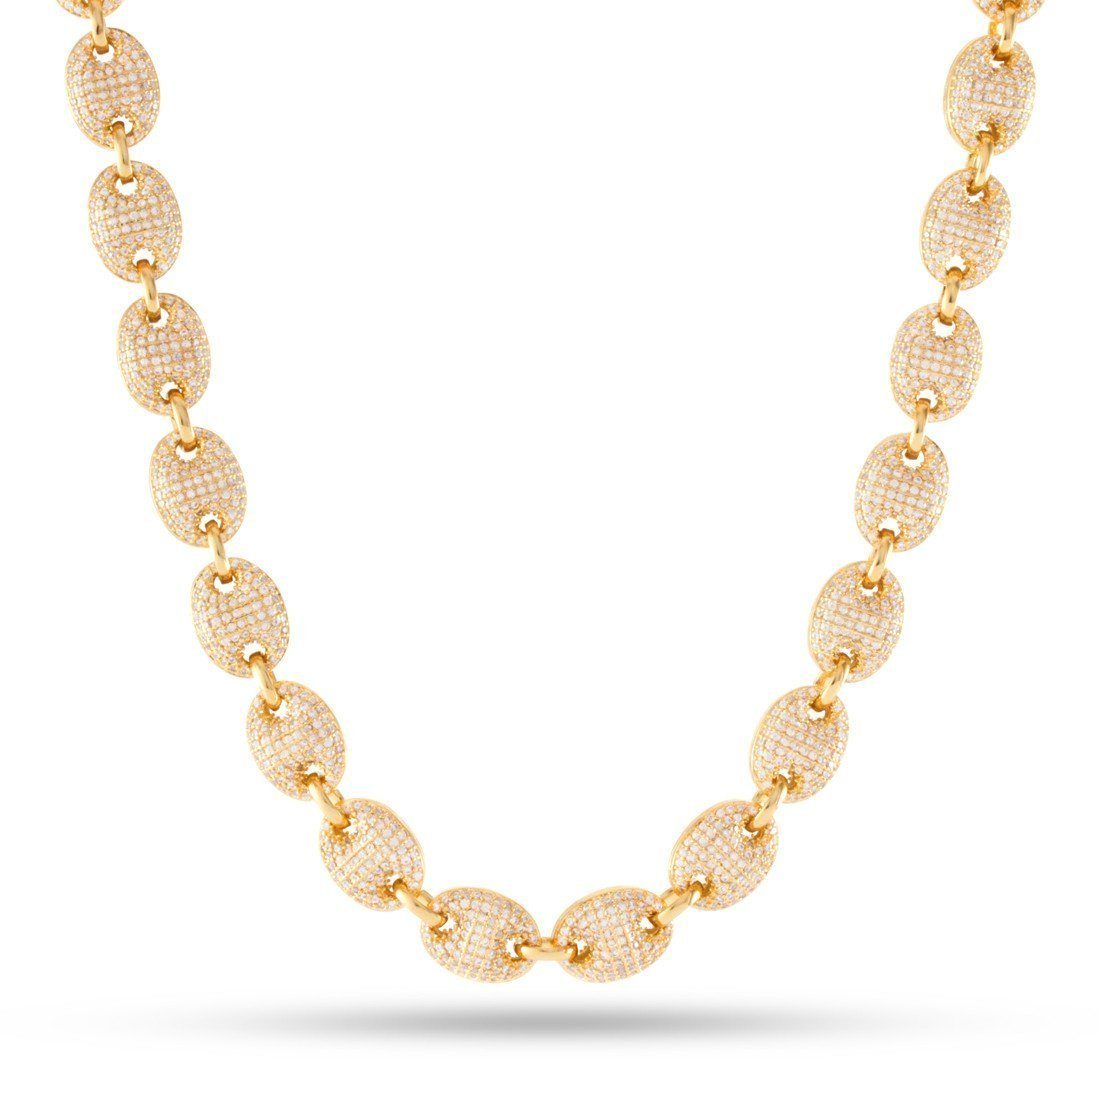 The 14K Gold CZ G-Link Chain